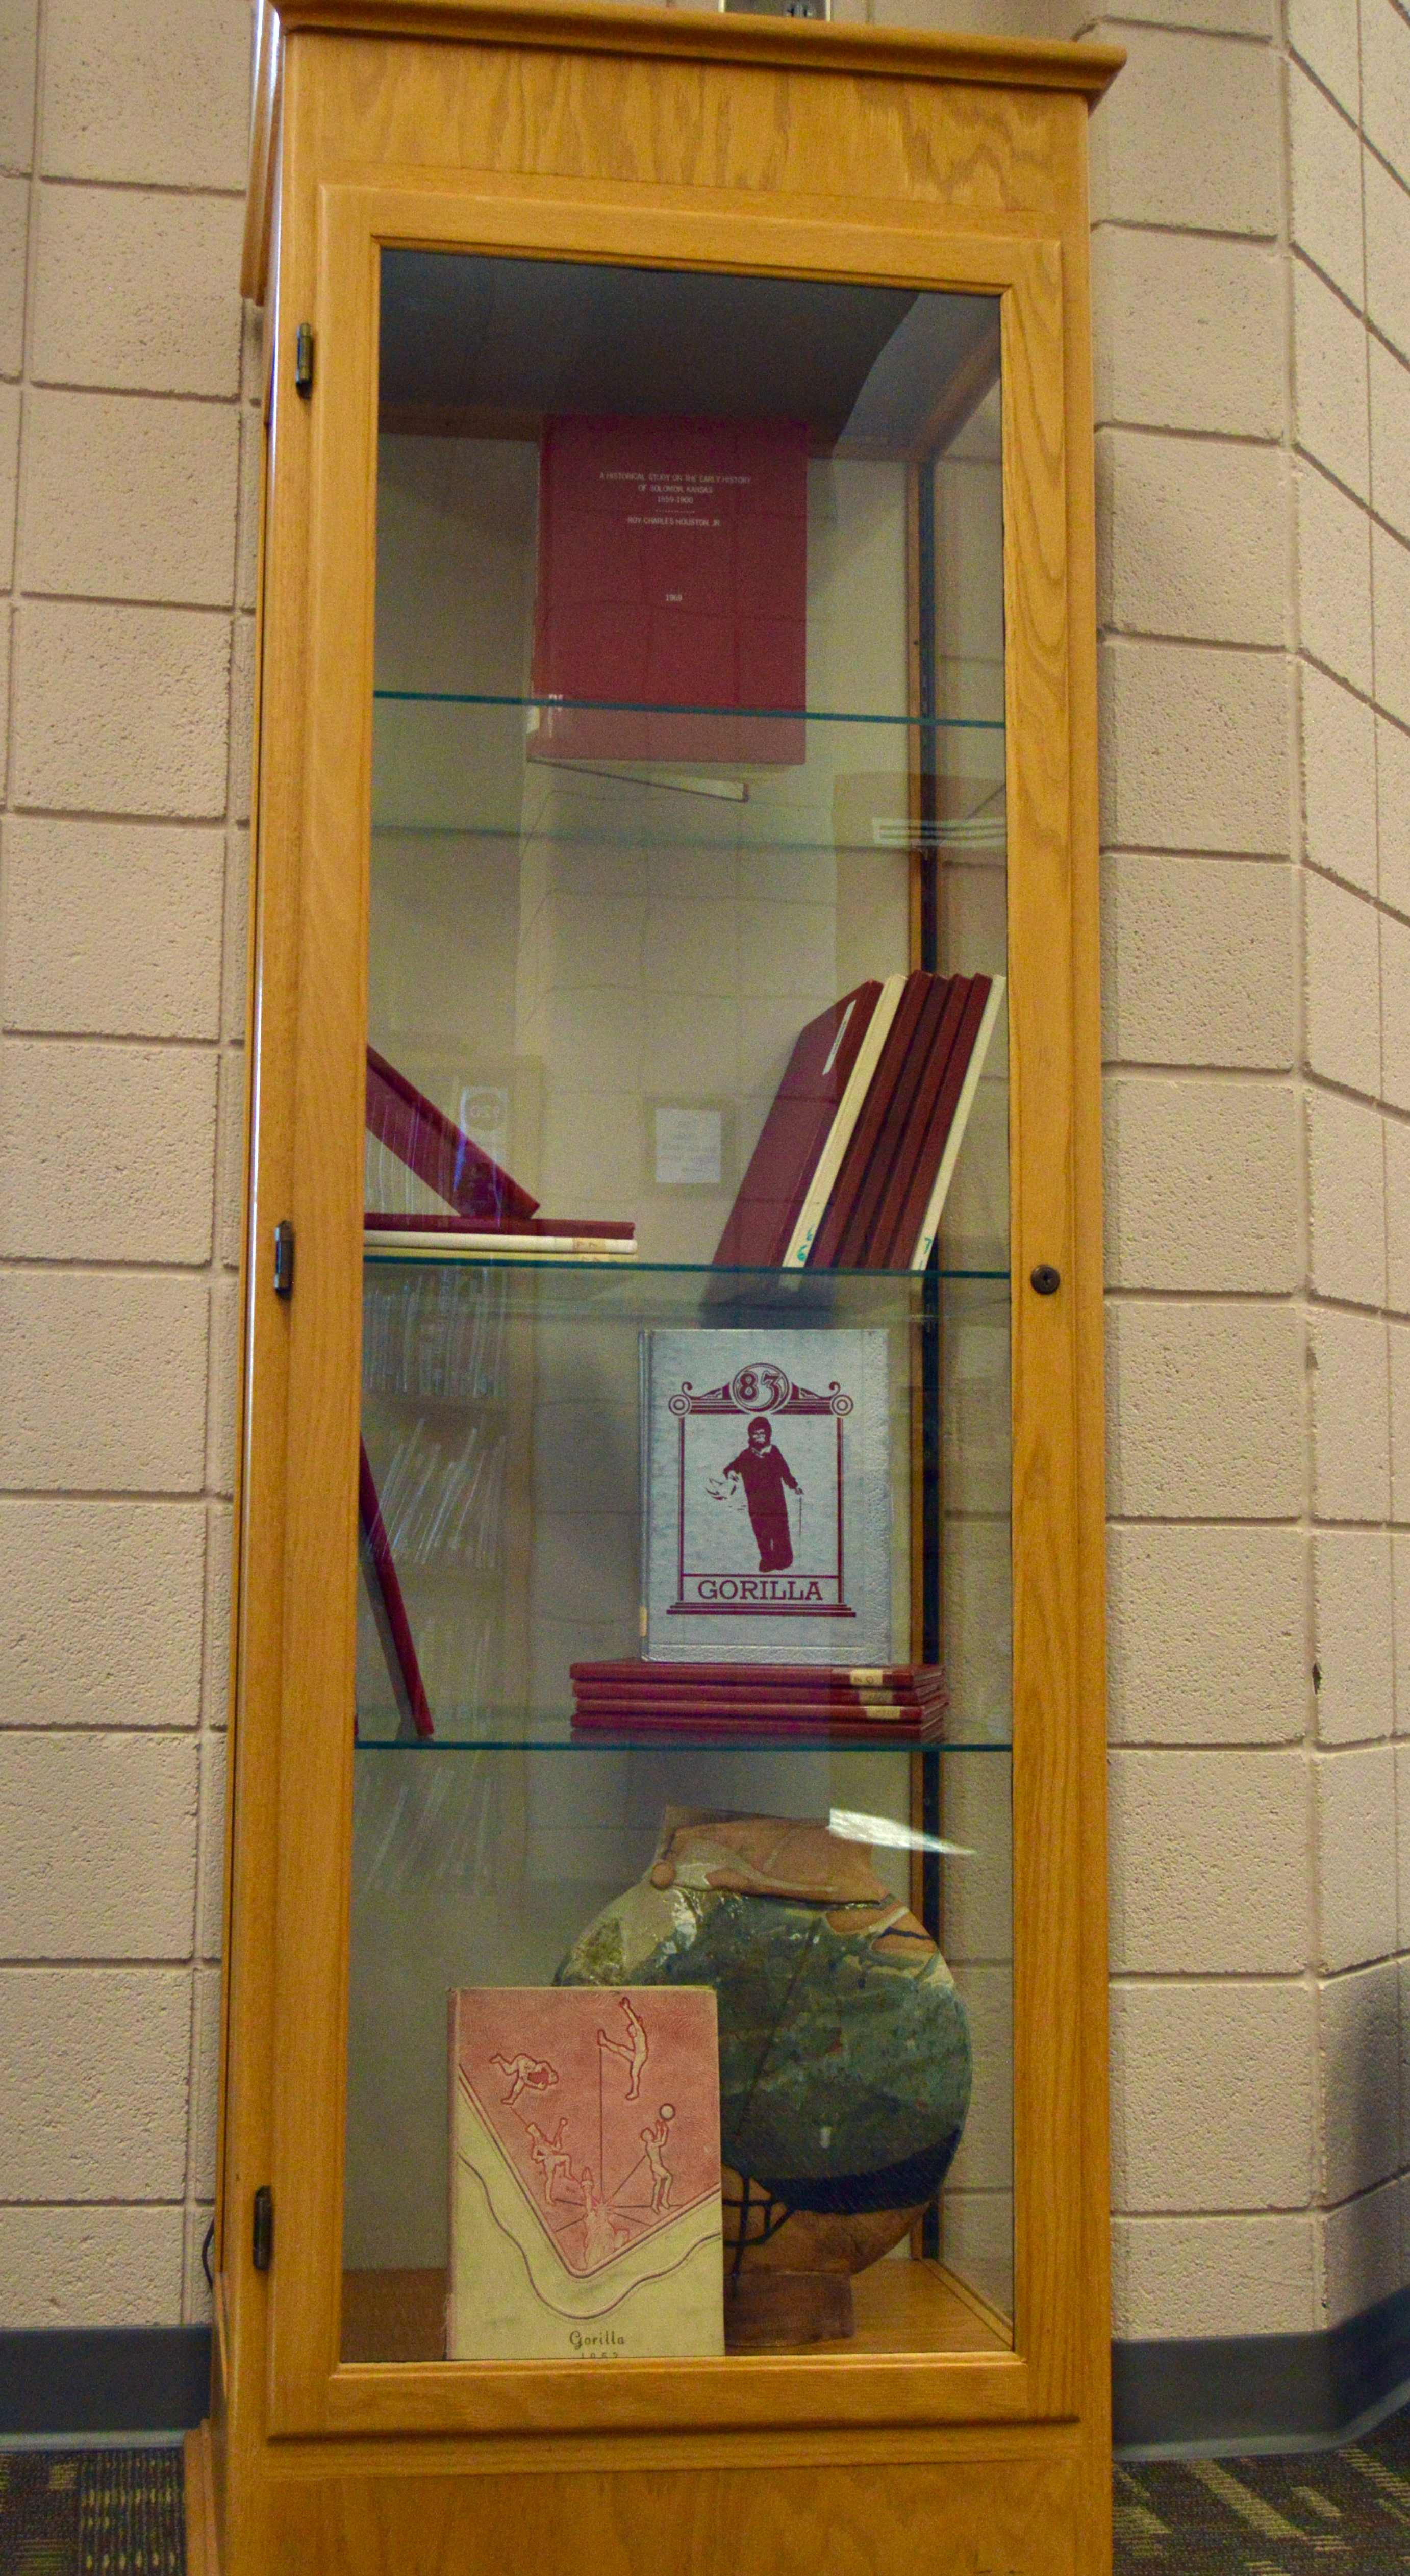 Past yearbooks on display